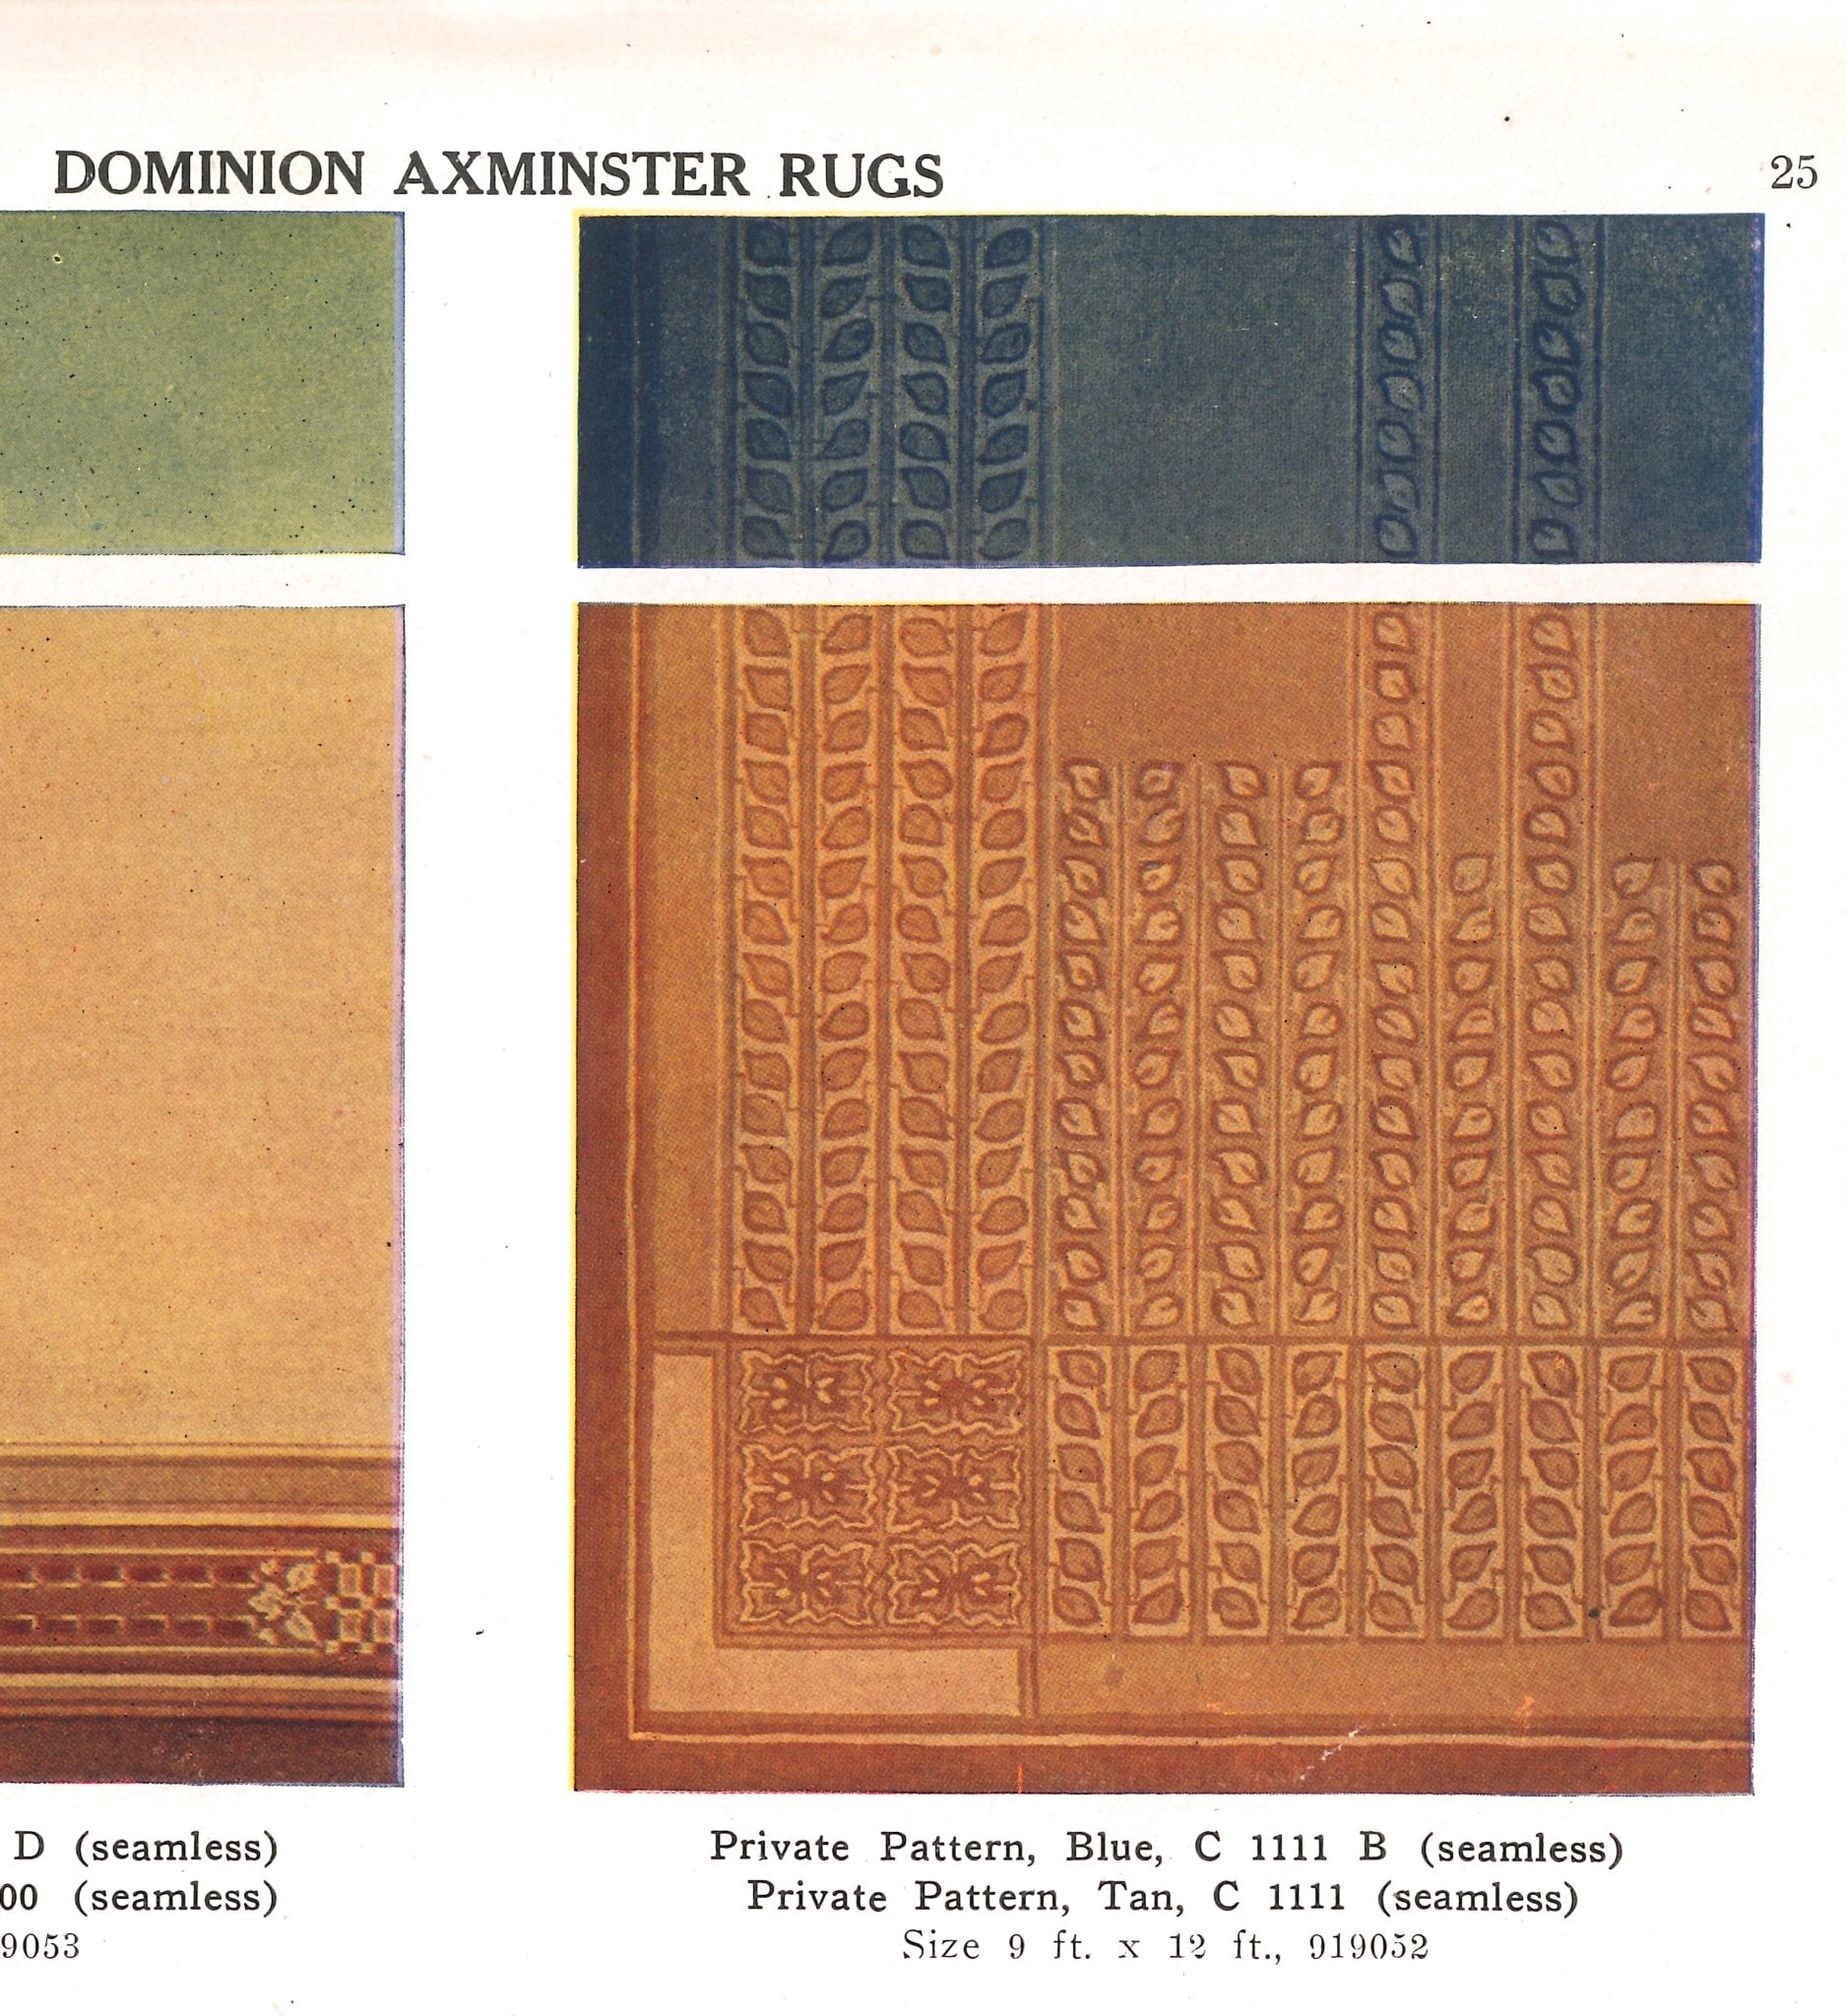 This is the source image for the Autumn Leaves Floorcloth design from a 1915 rug catalog.